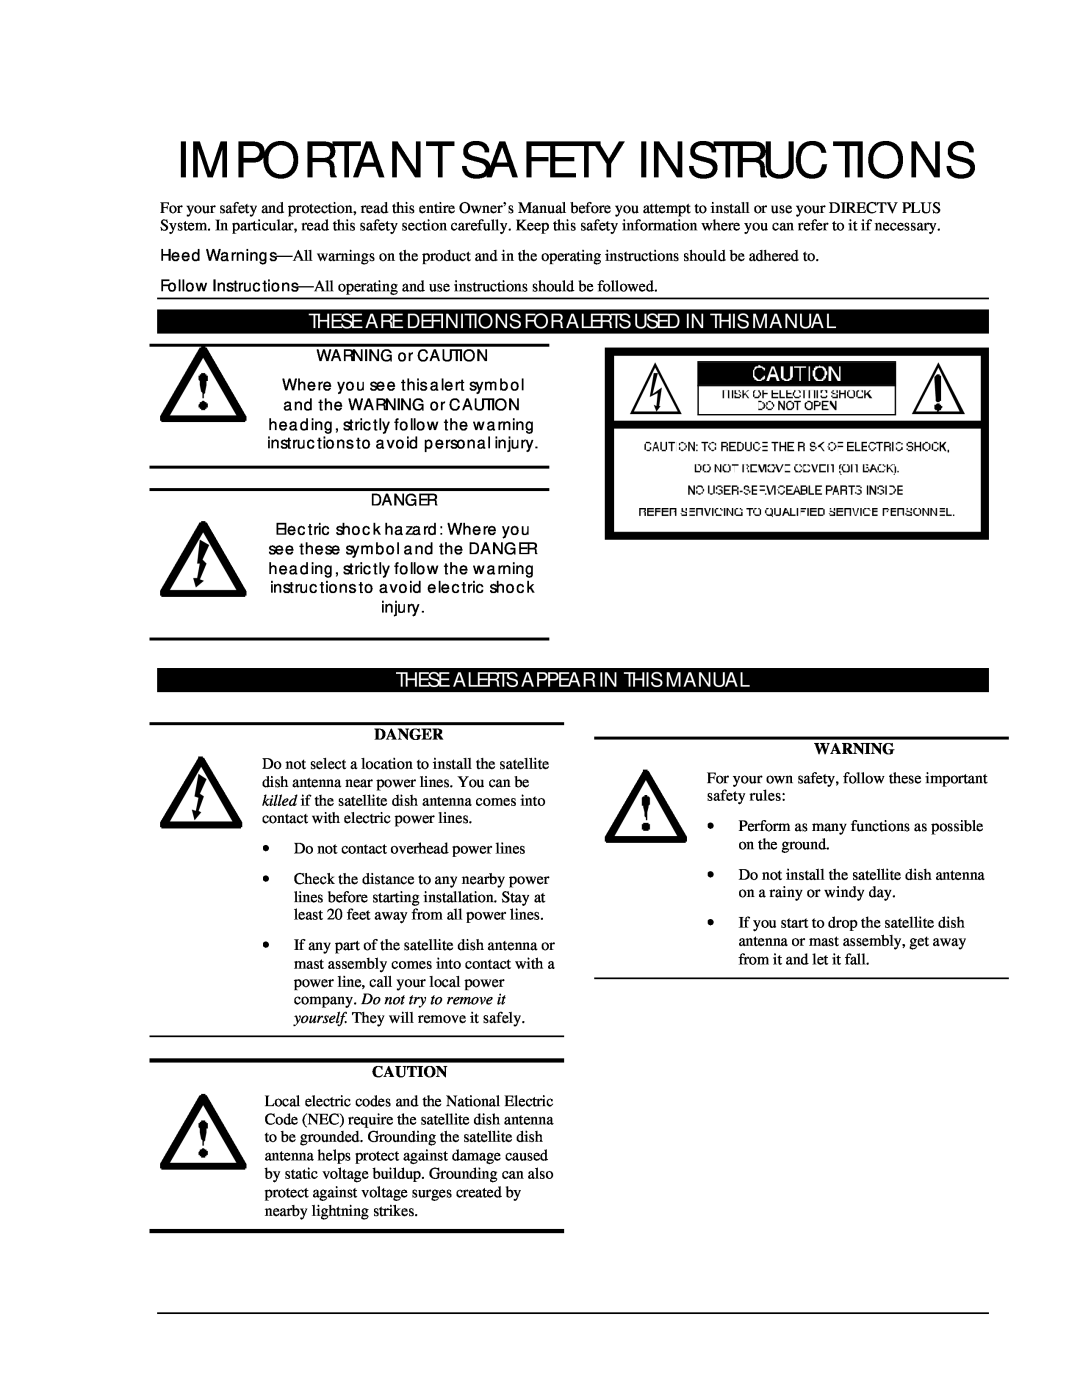 DirecTV HIRD-E11, HIRD-E25 owner manual Important Safety Instructions, These Alerts Appear In This Manual, Danger 